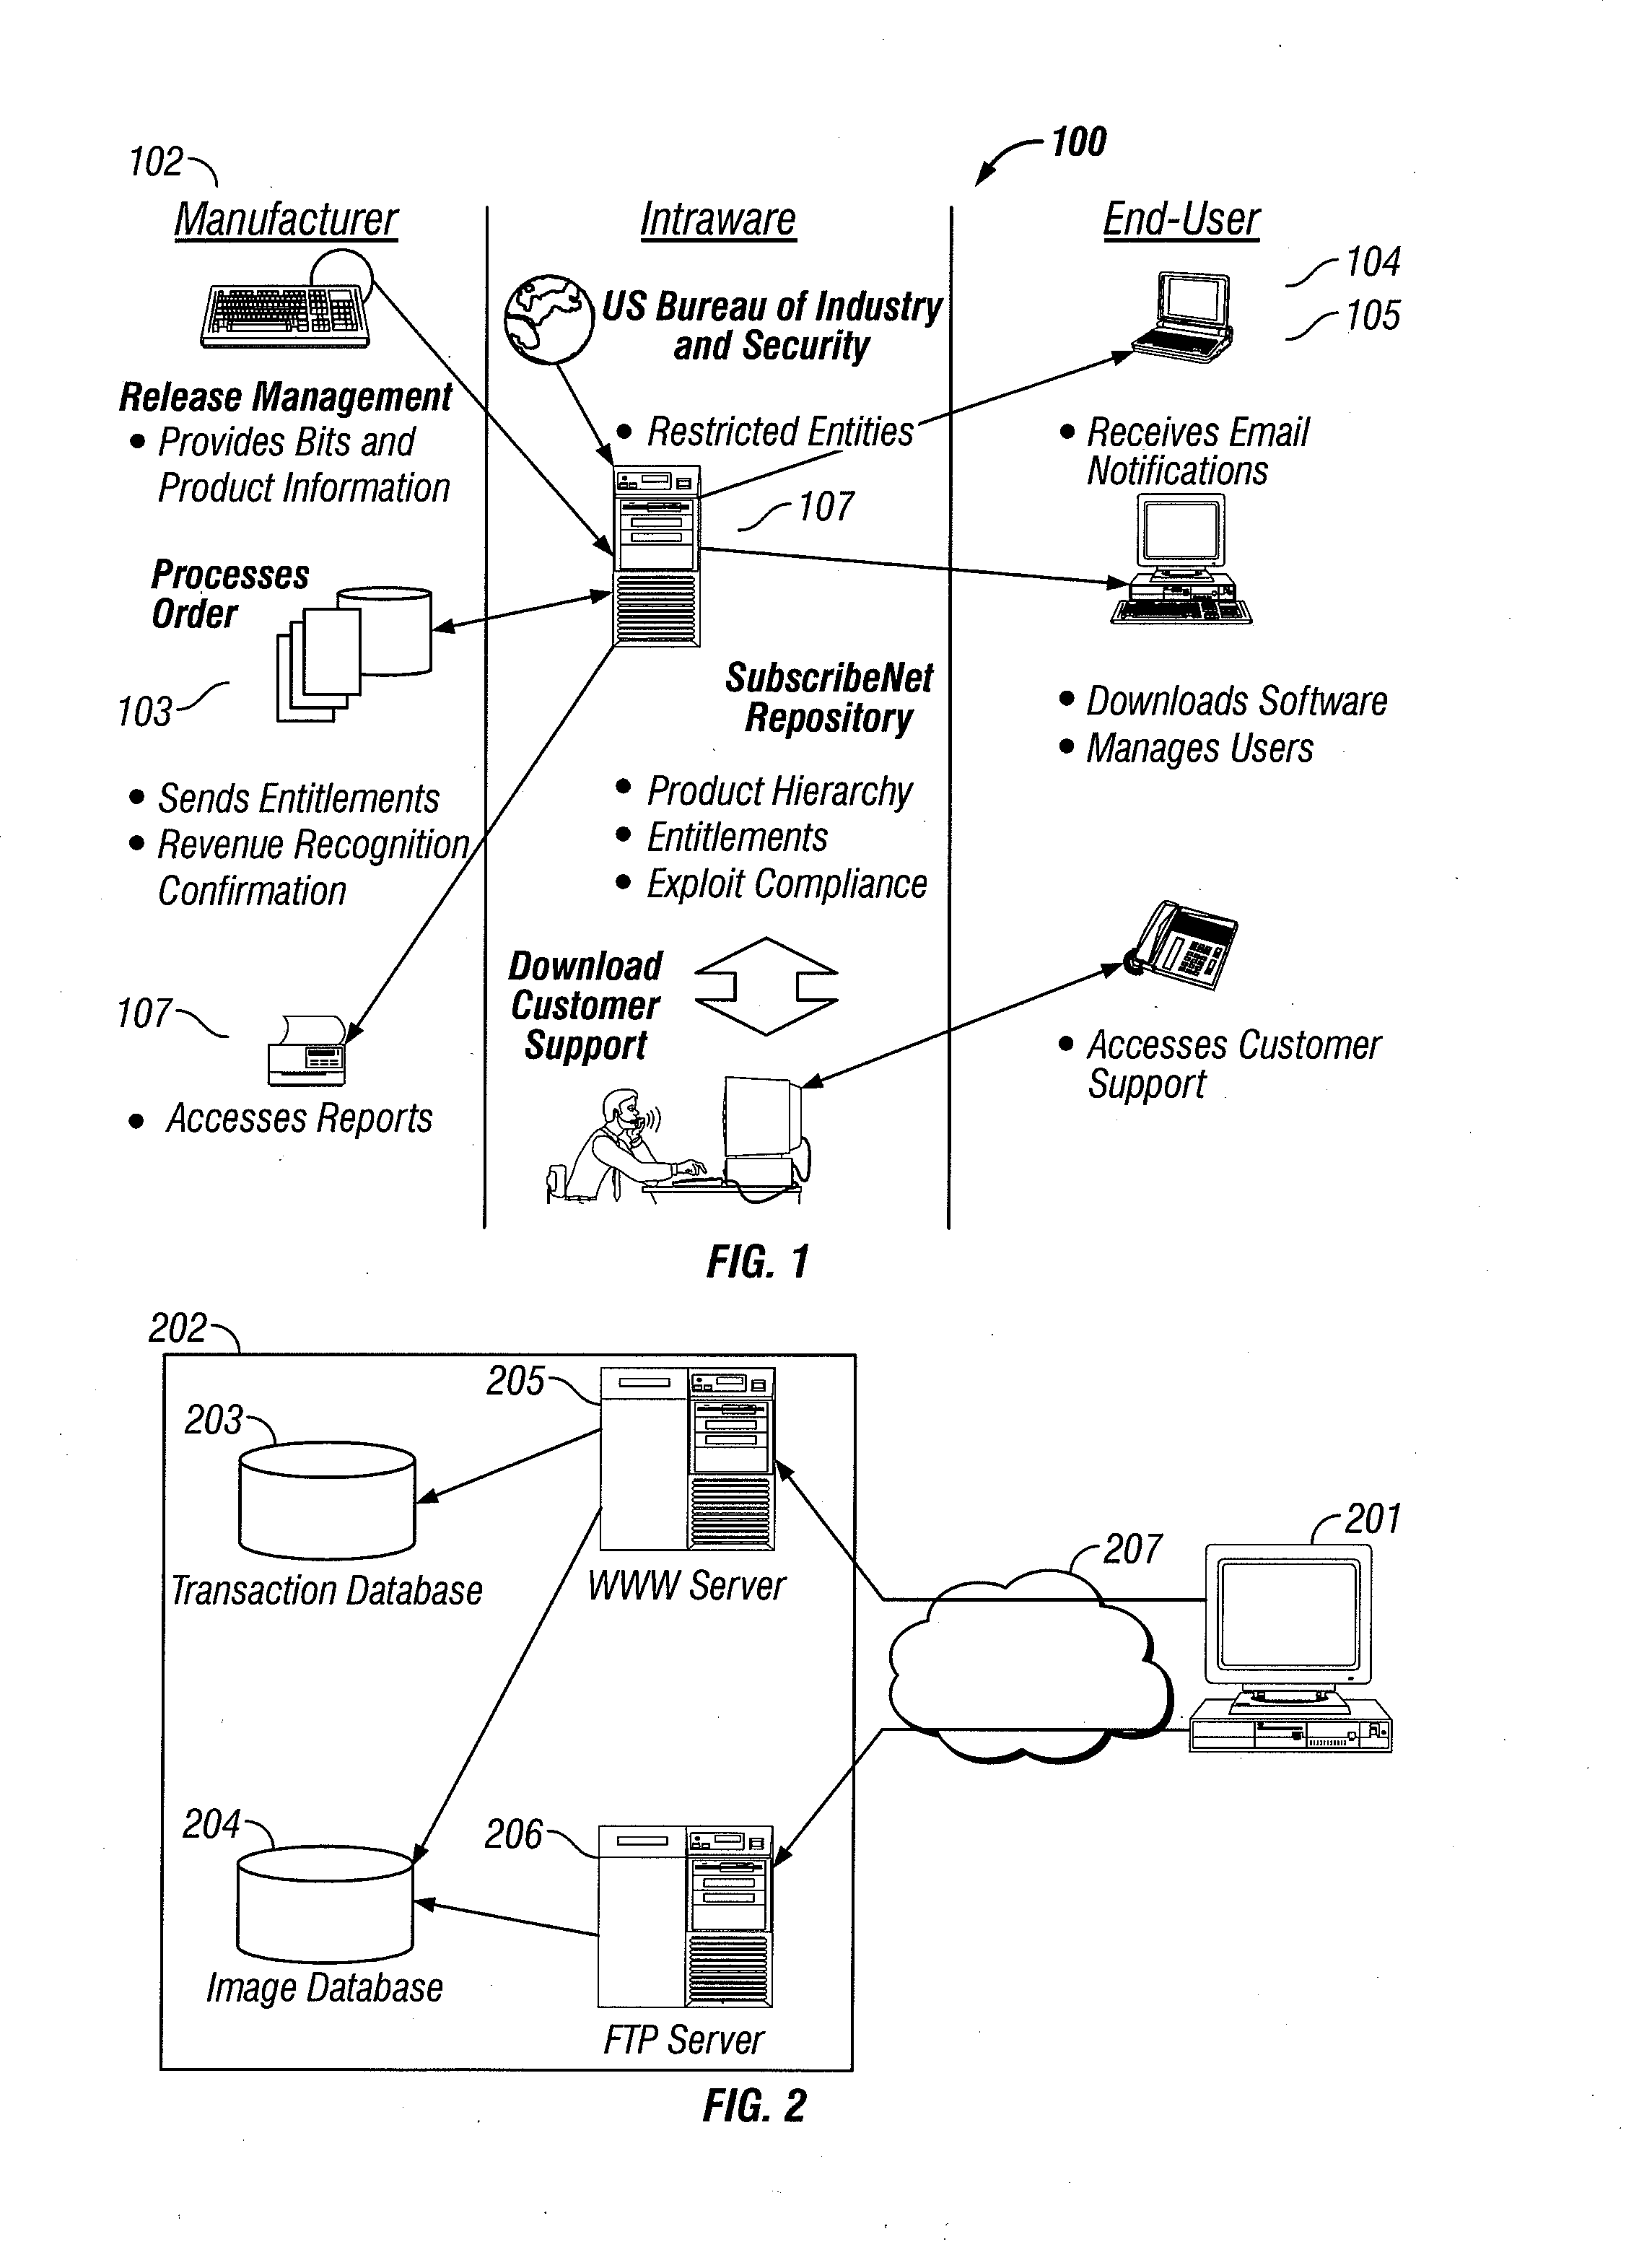 Method and System for Managing Digital Goods